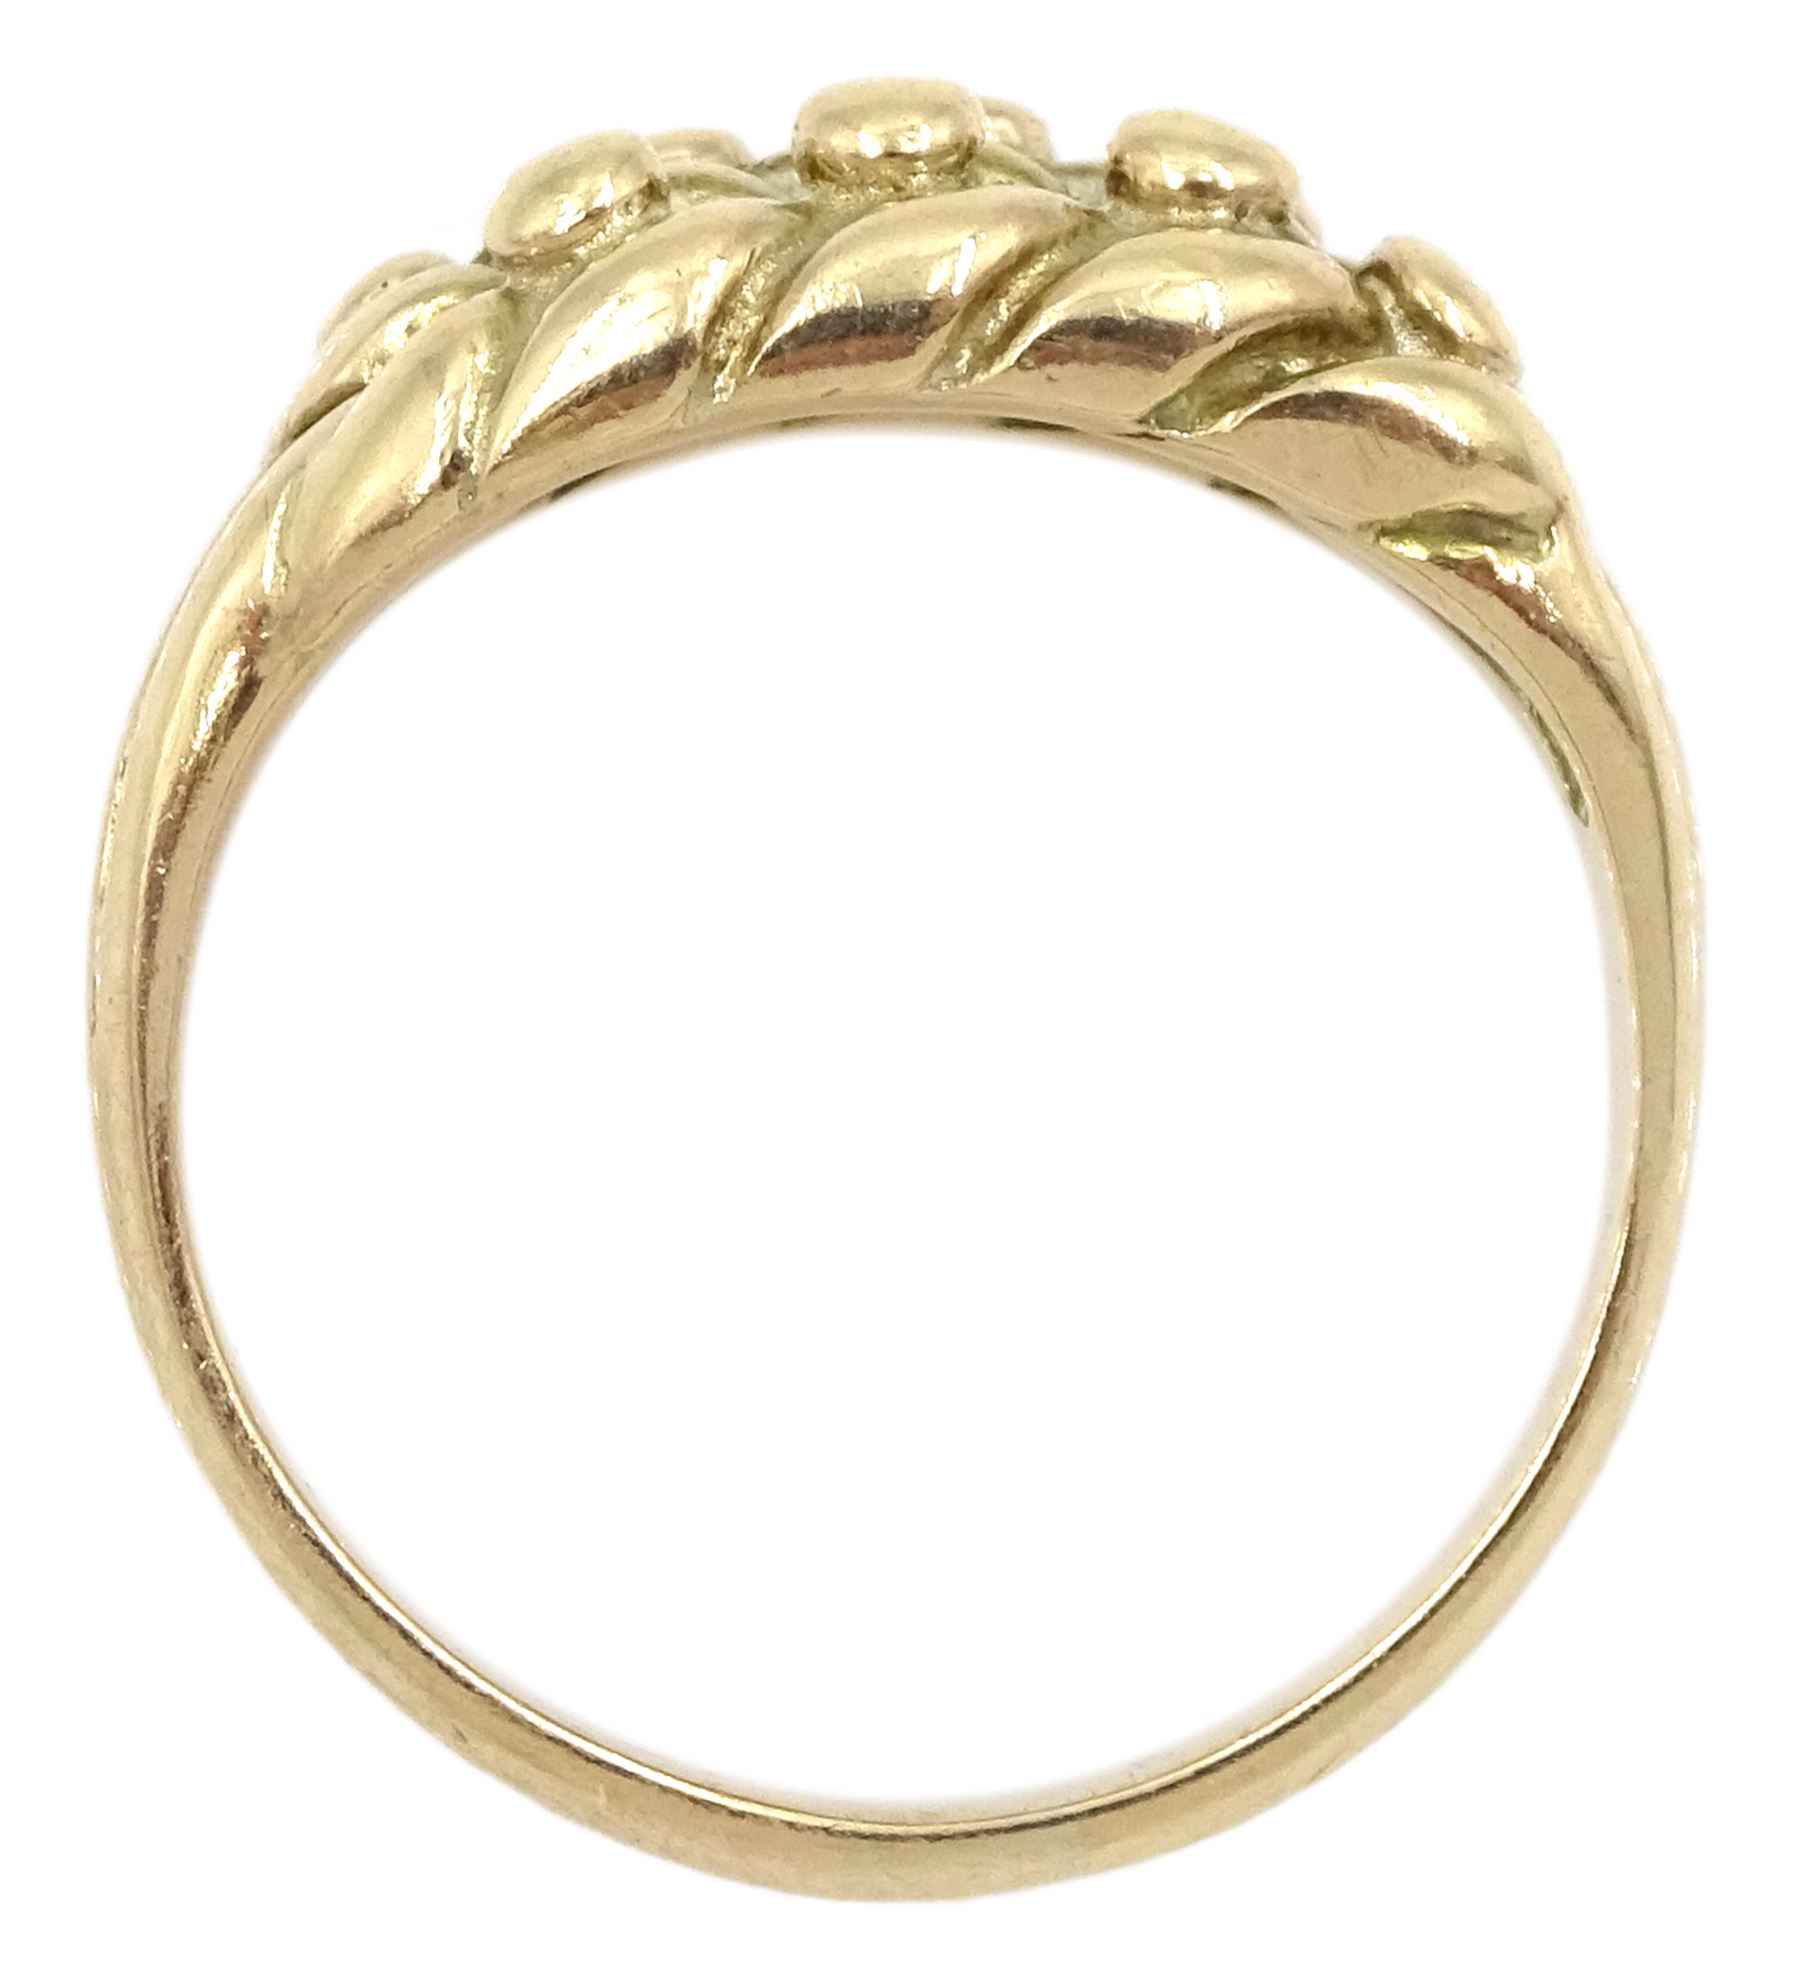 9ct gold keeper ring - Image 4 of 4